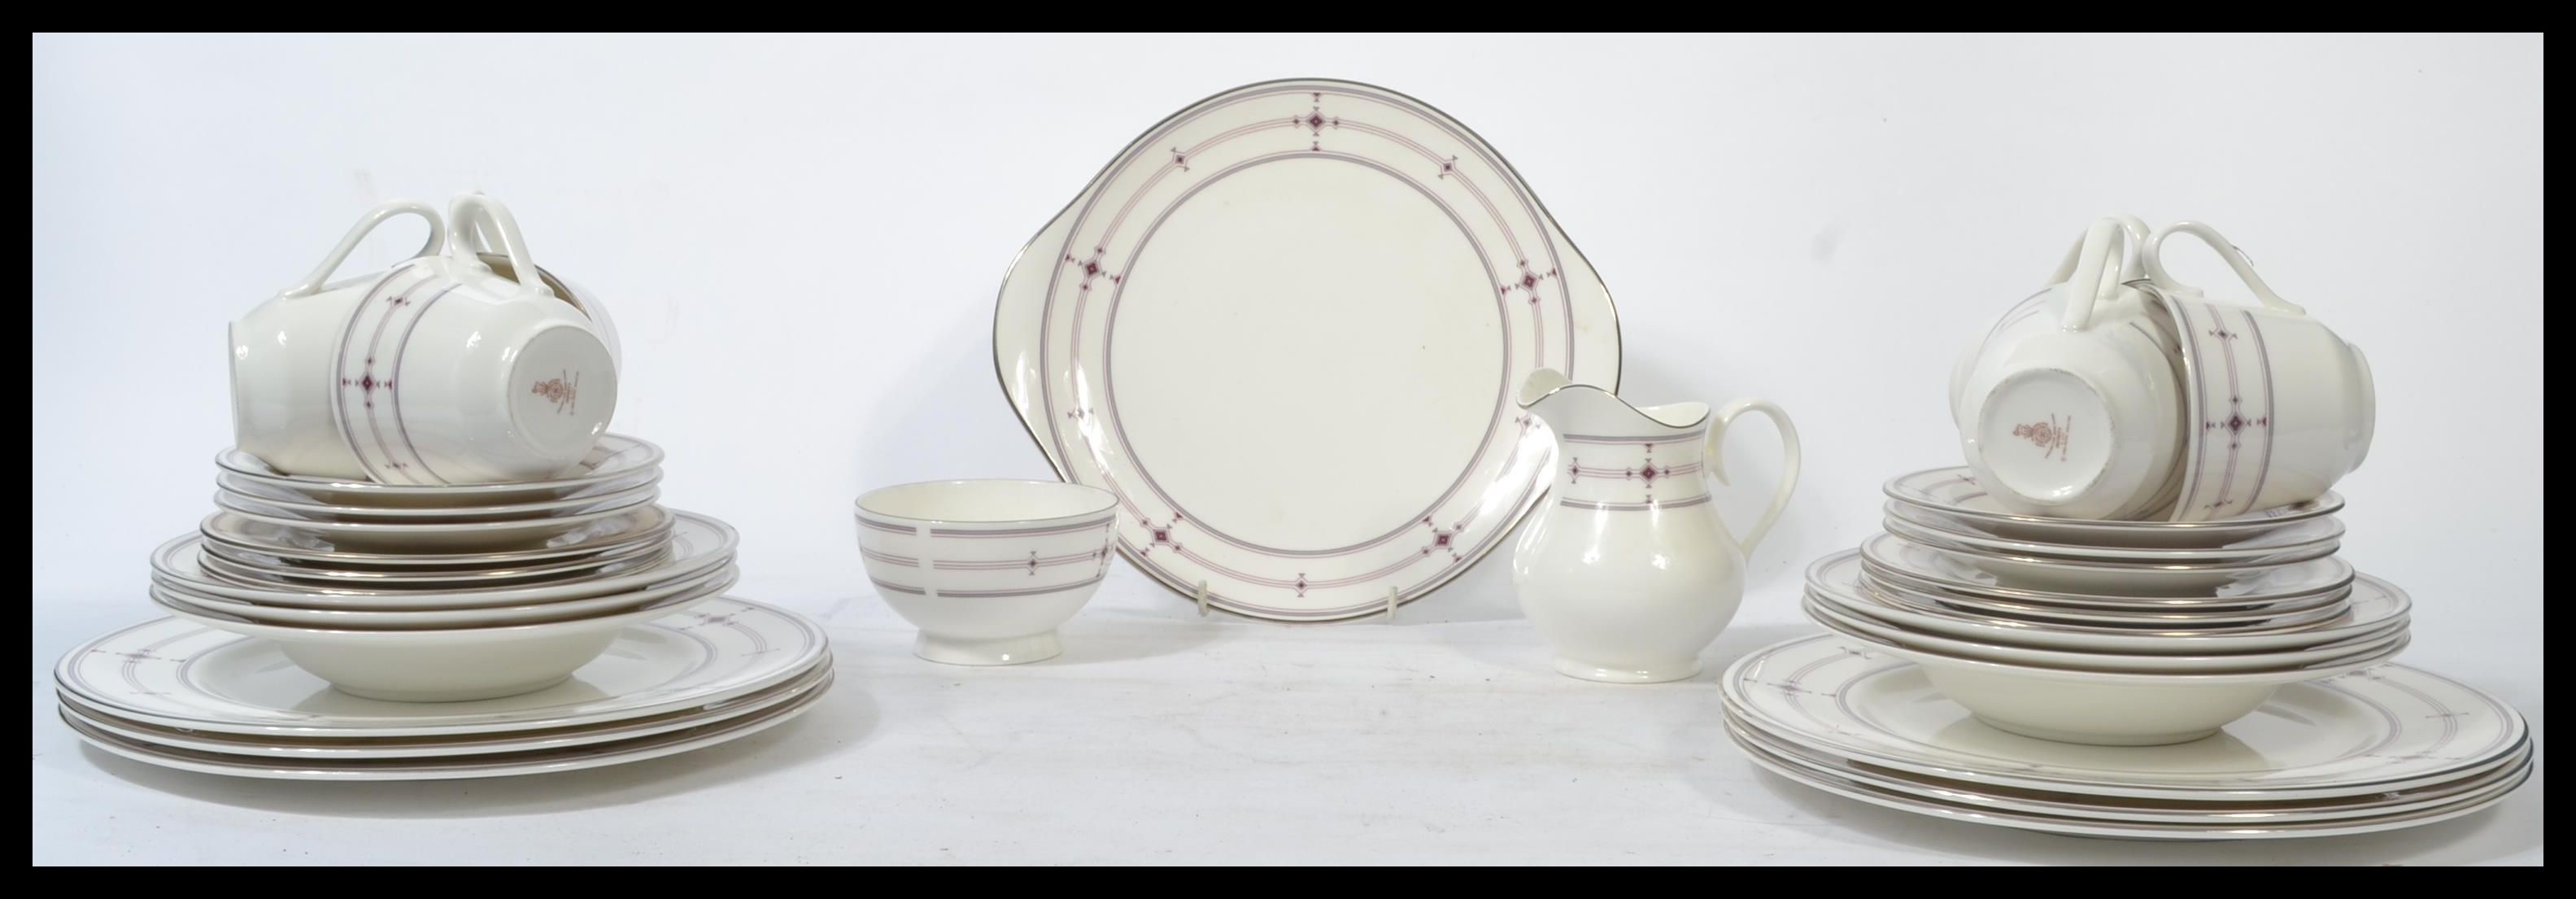 A Royal Doulton tea and dinner service in the Infi